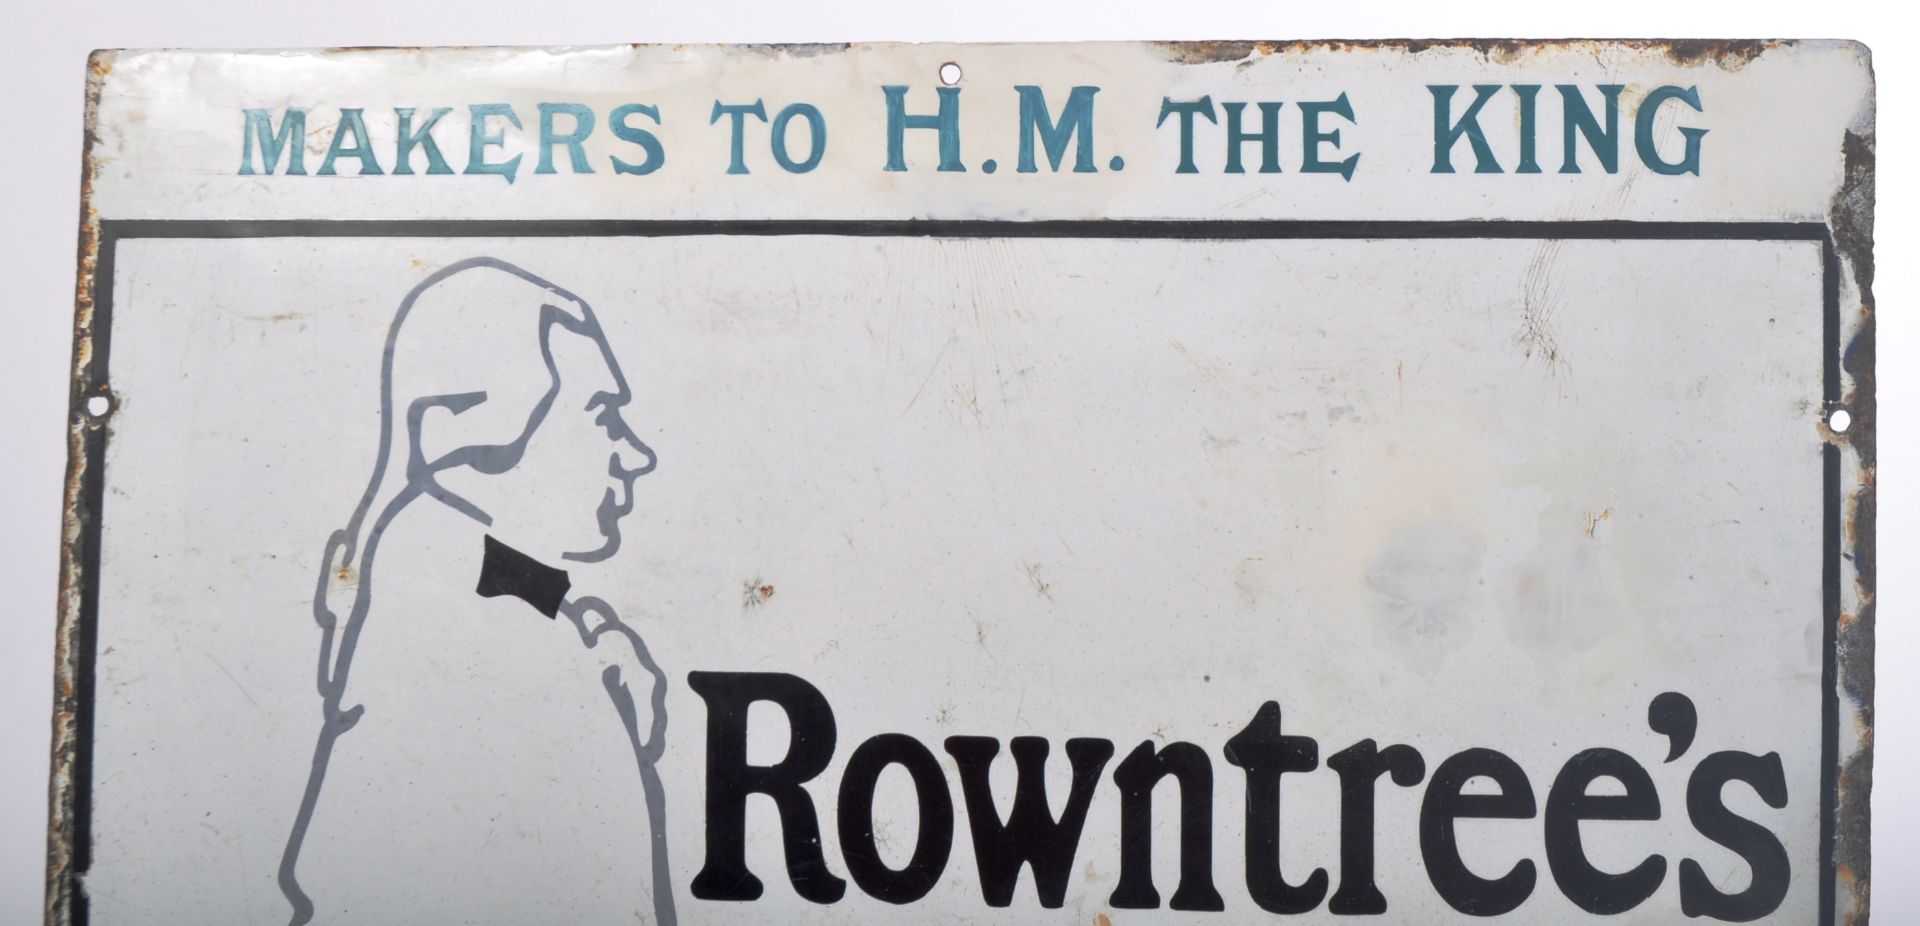 ROWNTREE'S ELECT COCOA - EARLY 20TH CENTURY ENAMEL SIGN - Image 2 of 5